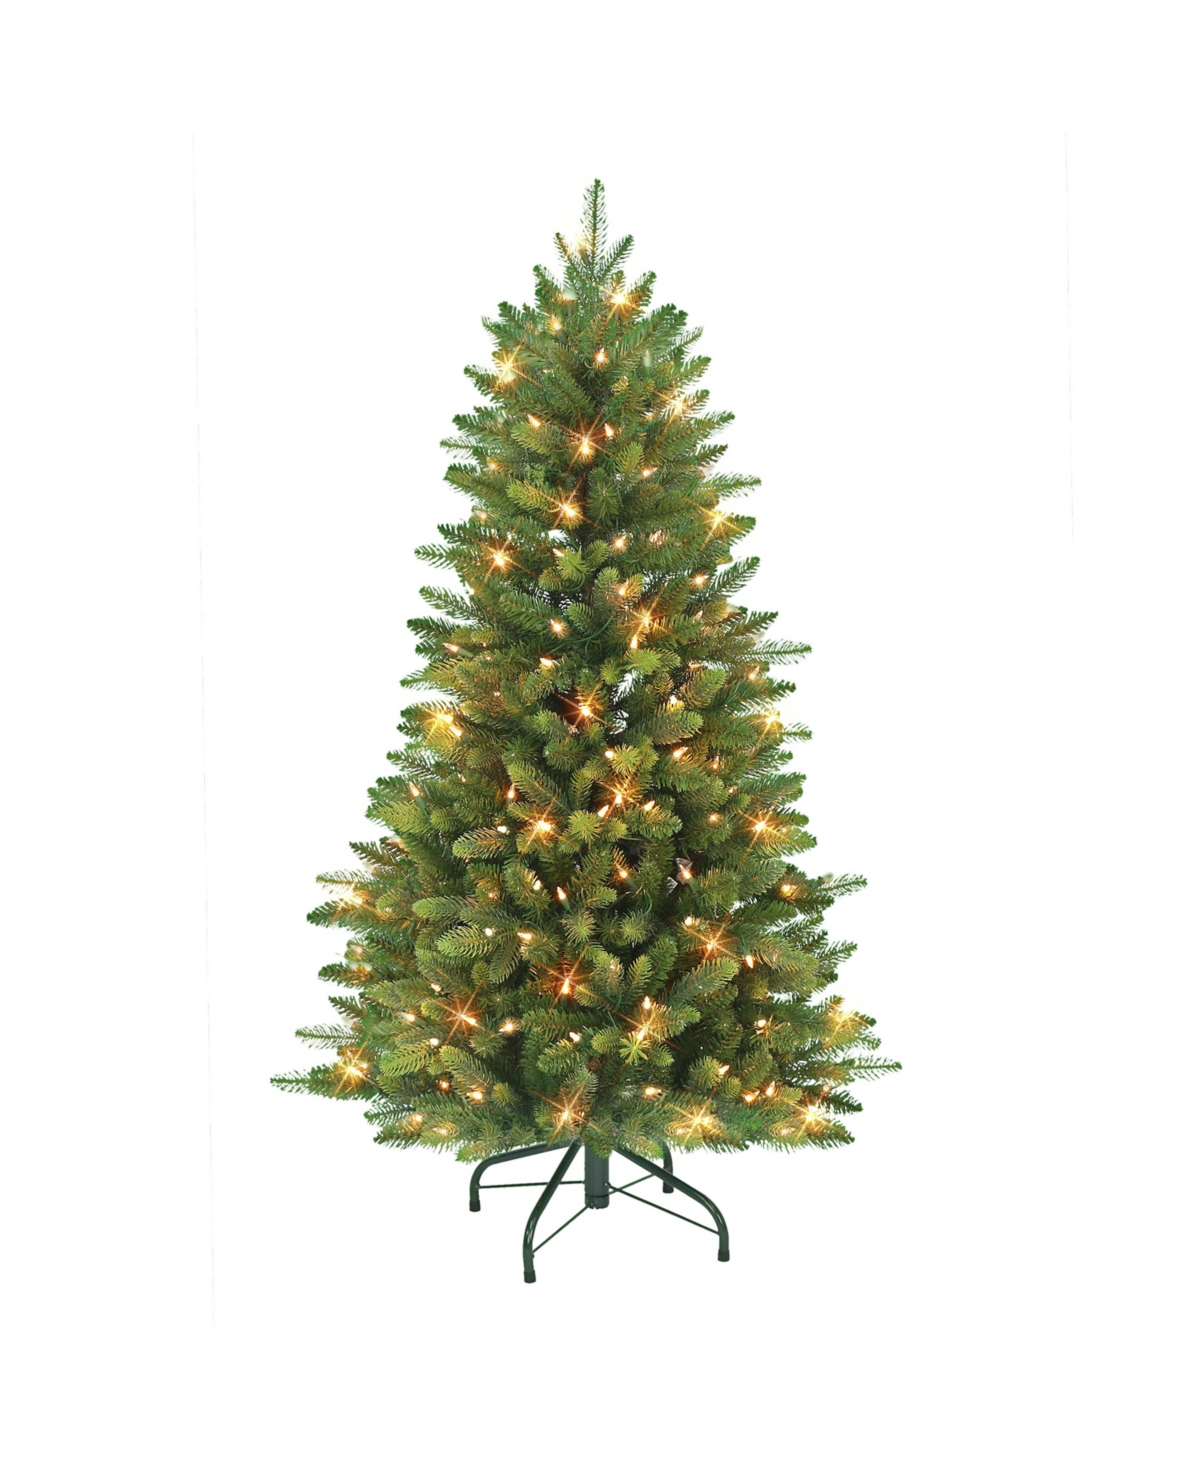 Puleo 4.5' Pre-lit Slim Westford Spruce Tree With Clear Incandescent Lights, 707 Tips In Green